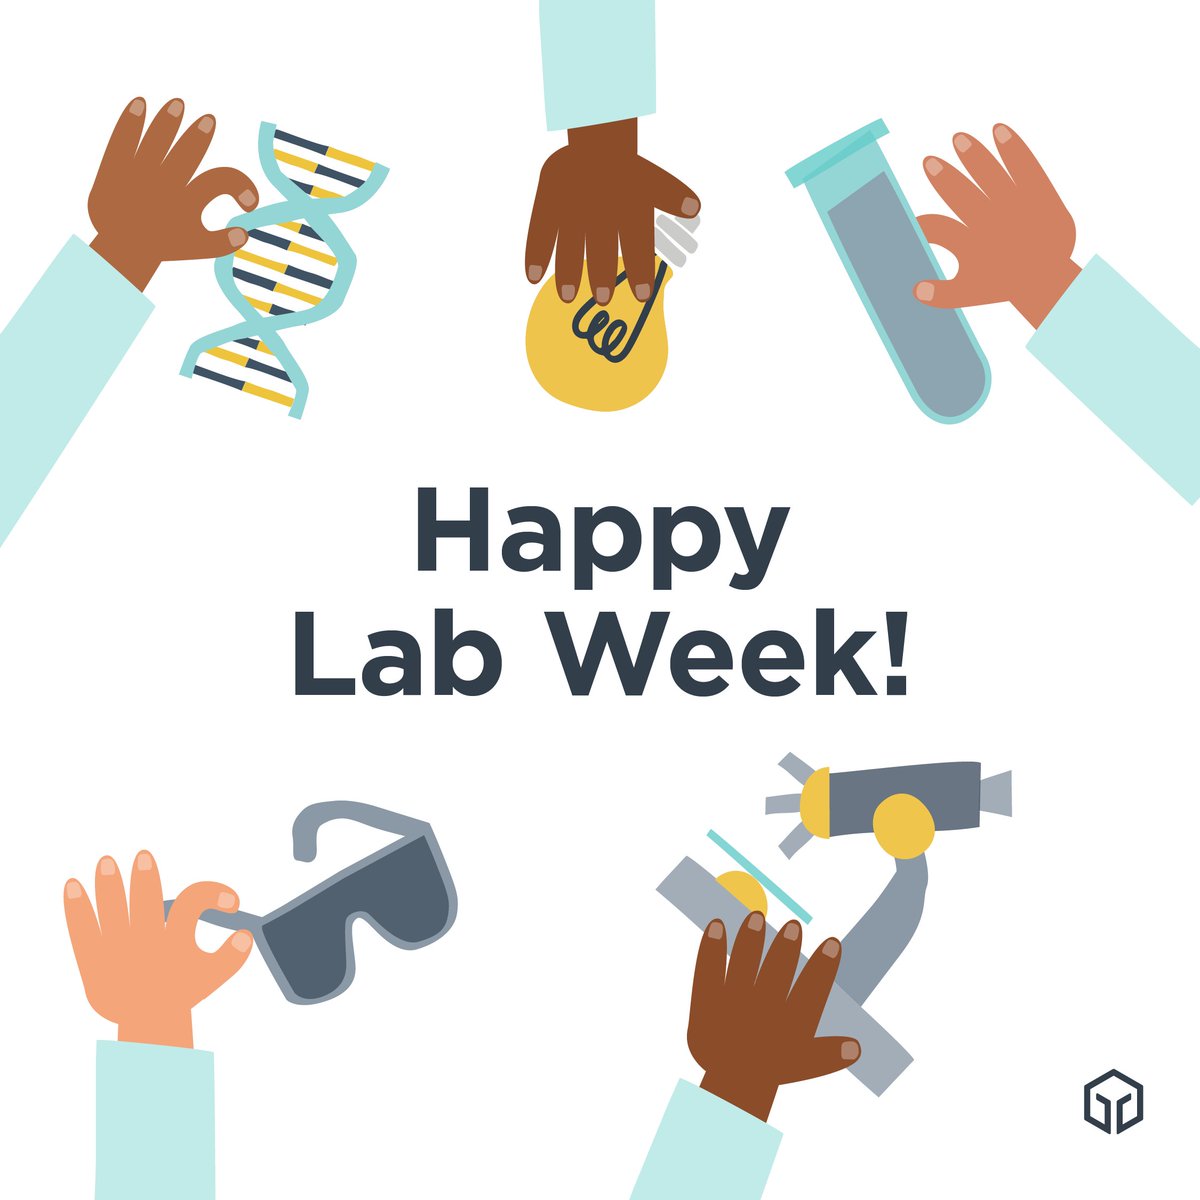 Wishing all our lab team members a very happy Medical Laboratory Professionals Week! Thank you for all of your hard work and the dedication you bring to patients every single day. #WeAreFMI #ASCPLabWeek24